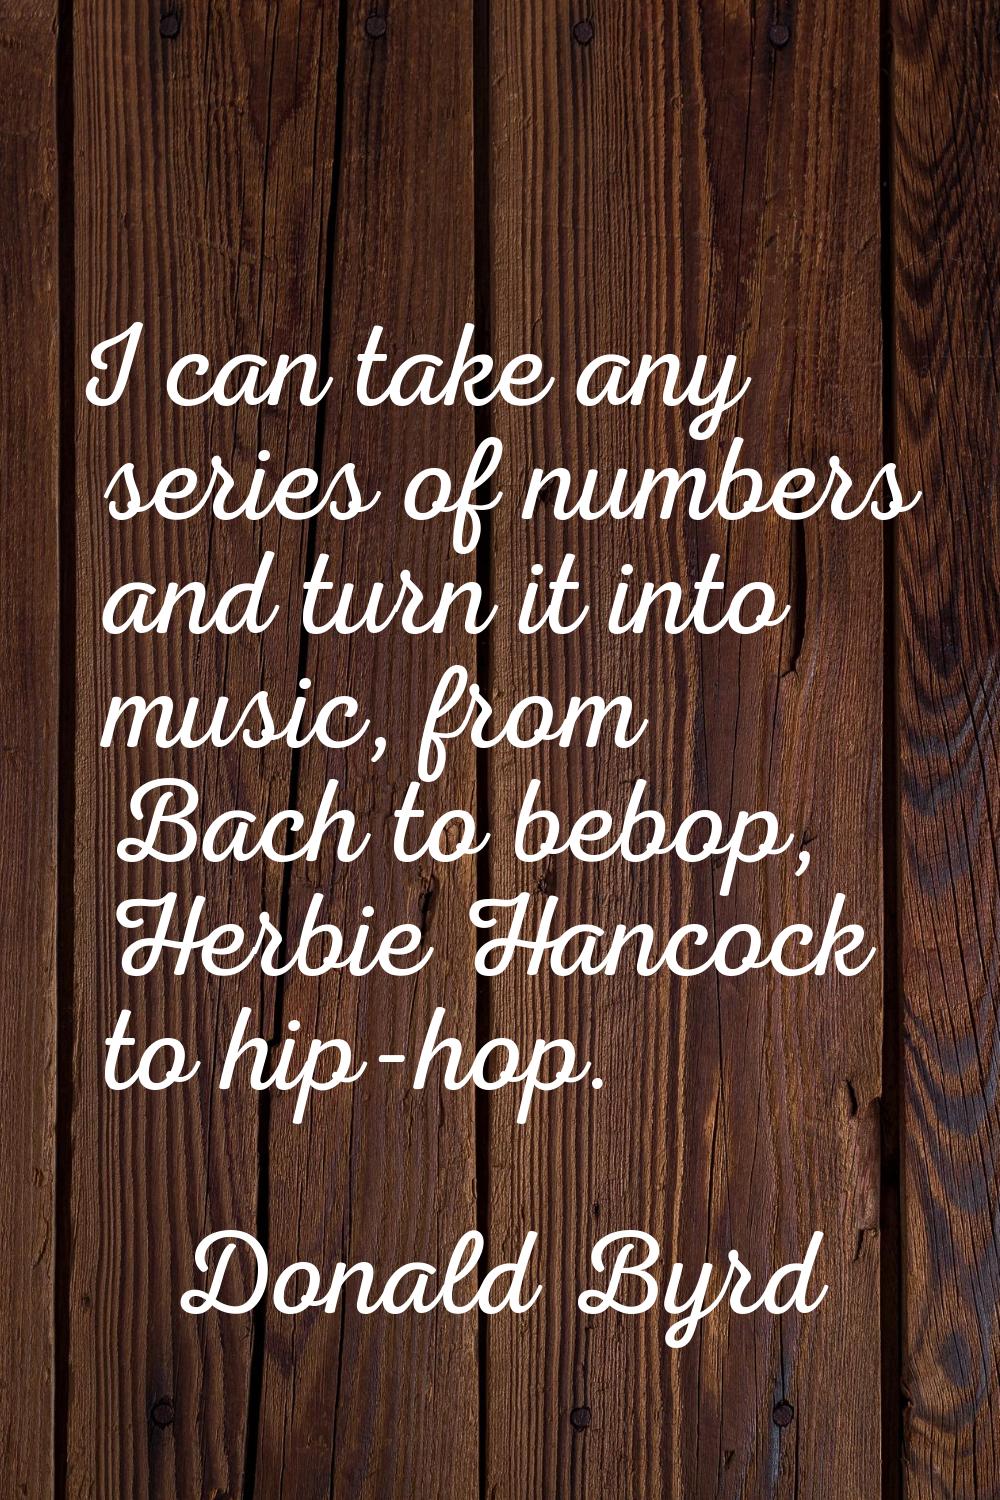 I can take any series of numbers and turn it into music, from Bach to bebop, Herbie Hancock to hip-